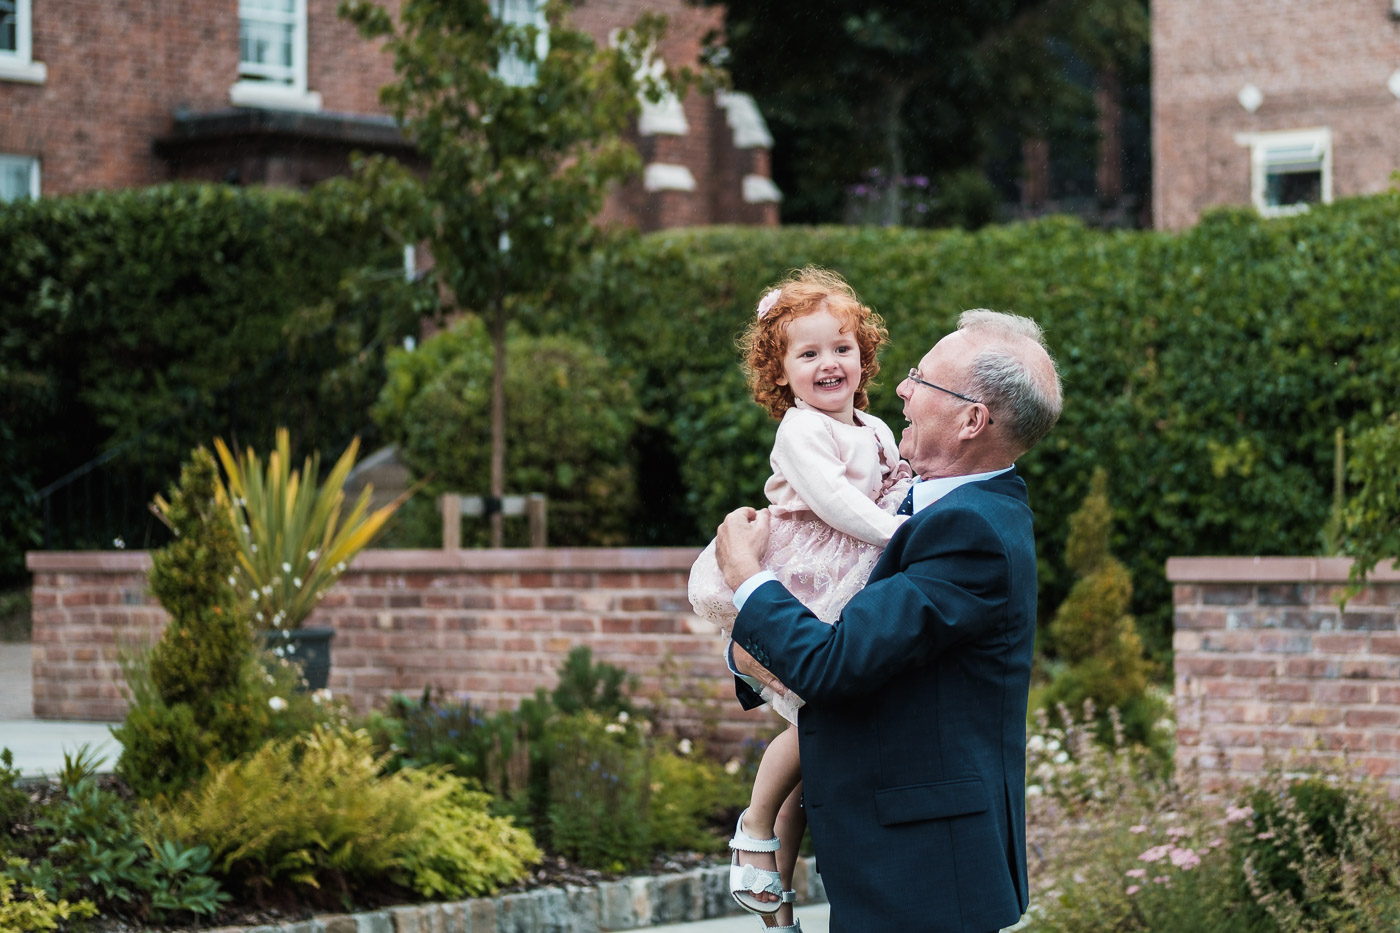 grandad has fun with his granddaughter in the grounds of the old palace in chester at his sons wedding